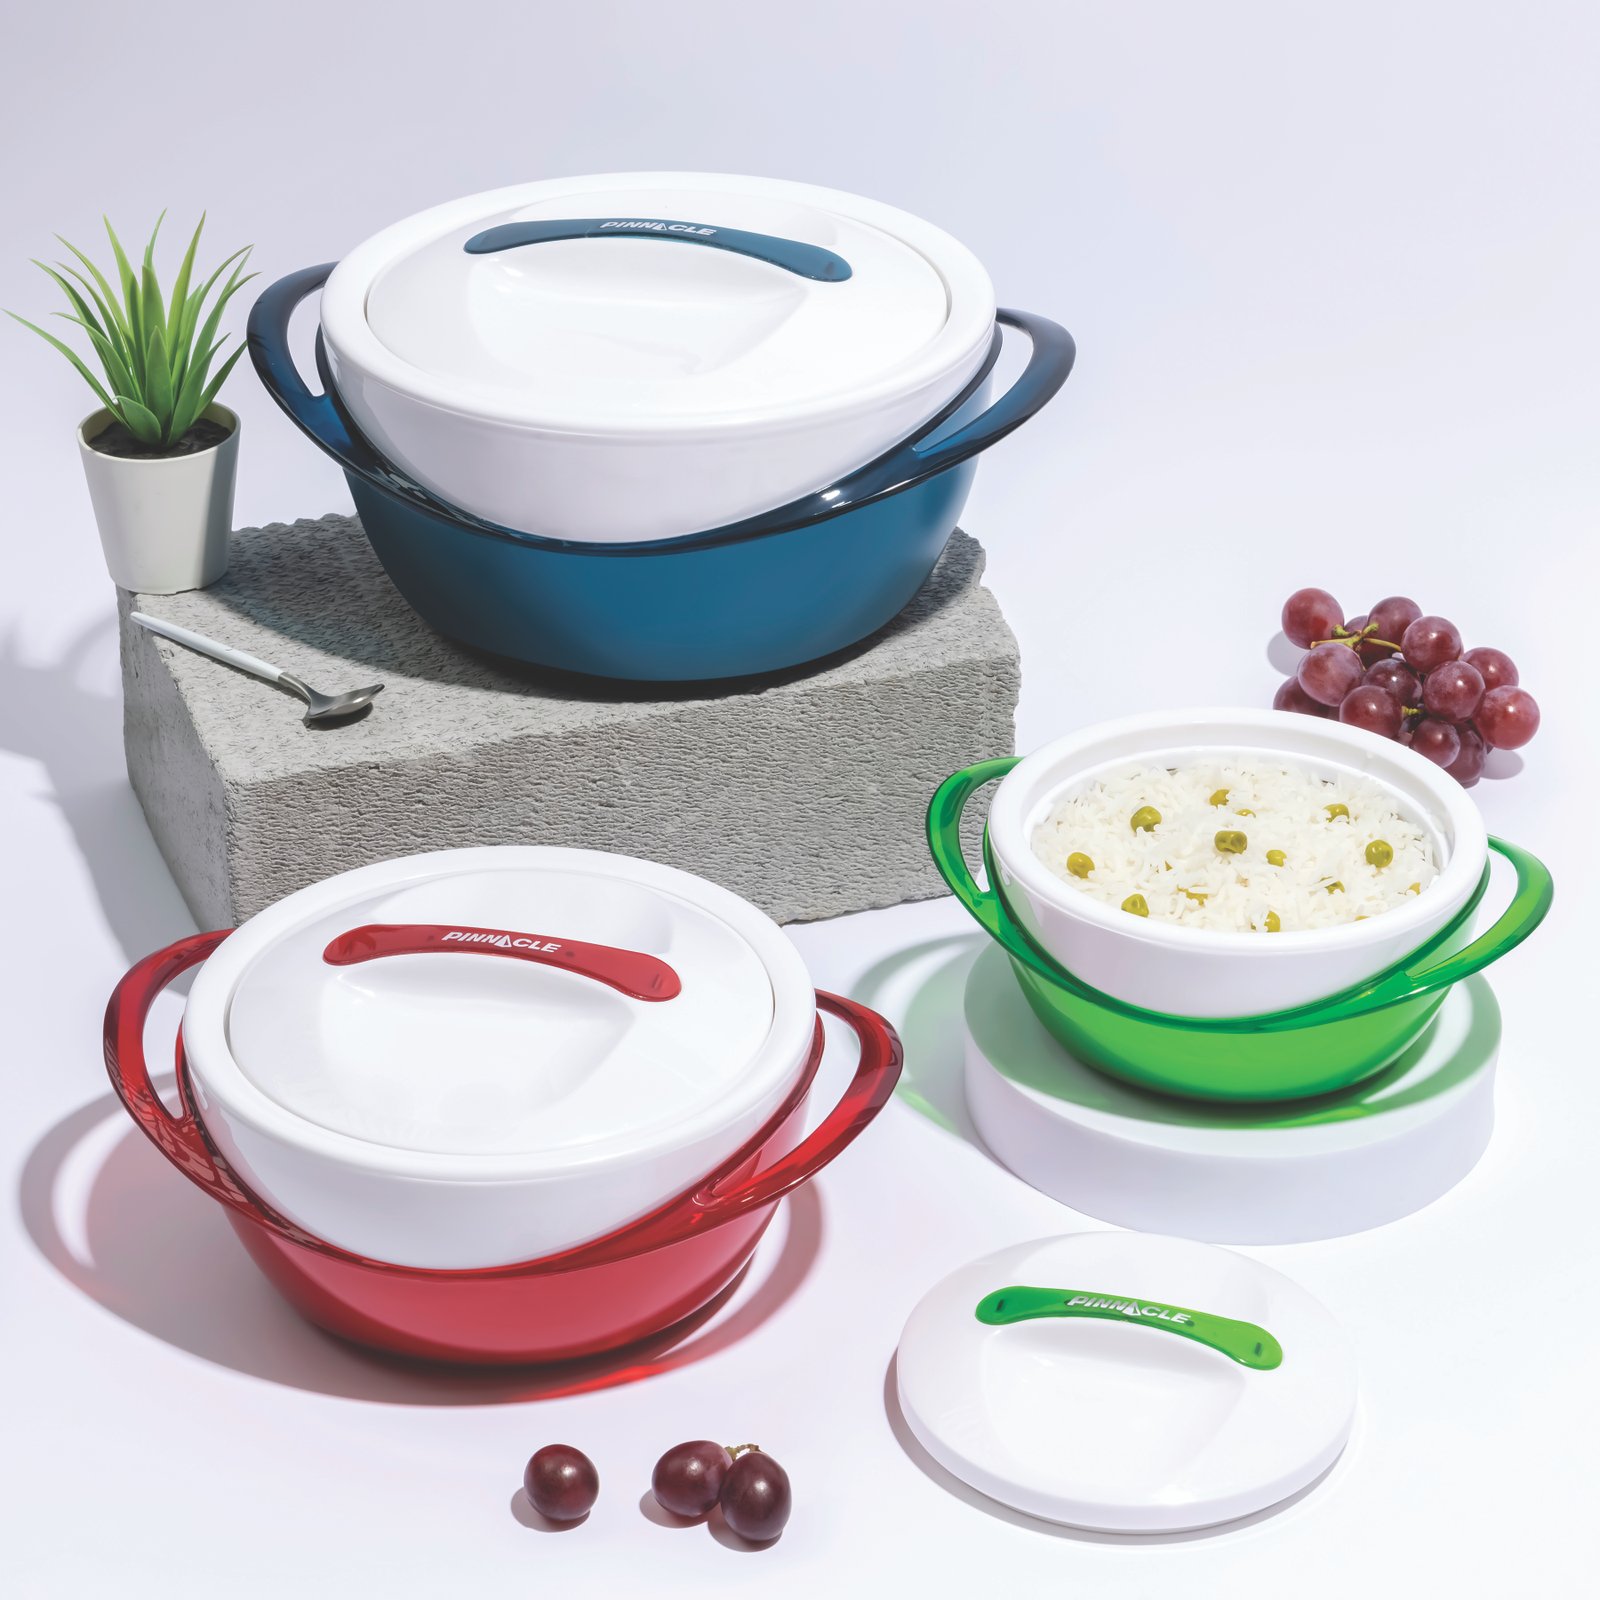 Pinnacle Tokyo Plastic Thermo Insulated Food Bowl Containers - RED 3 Bowls